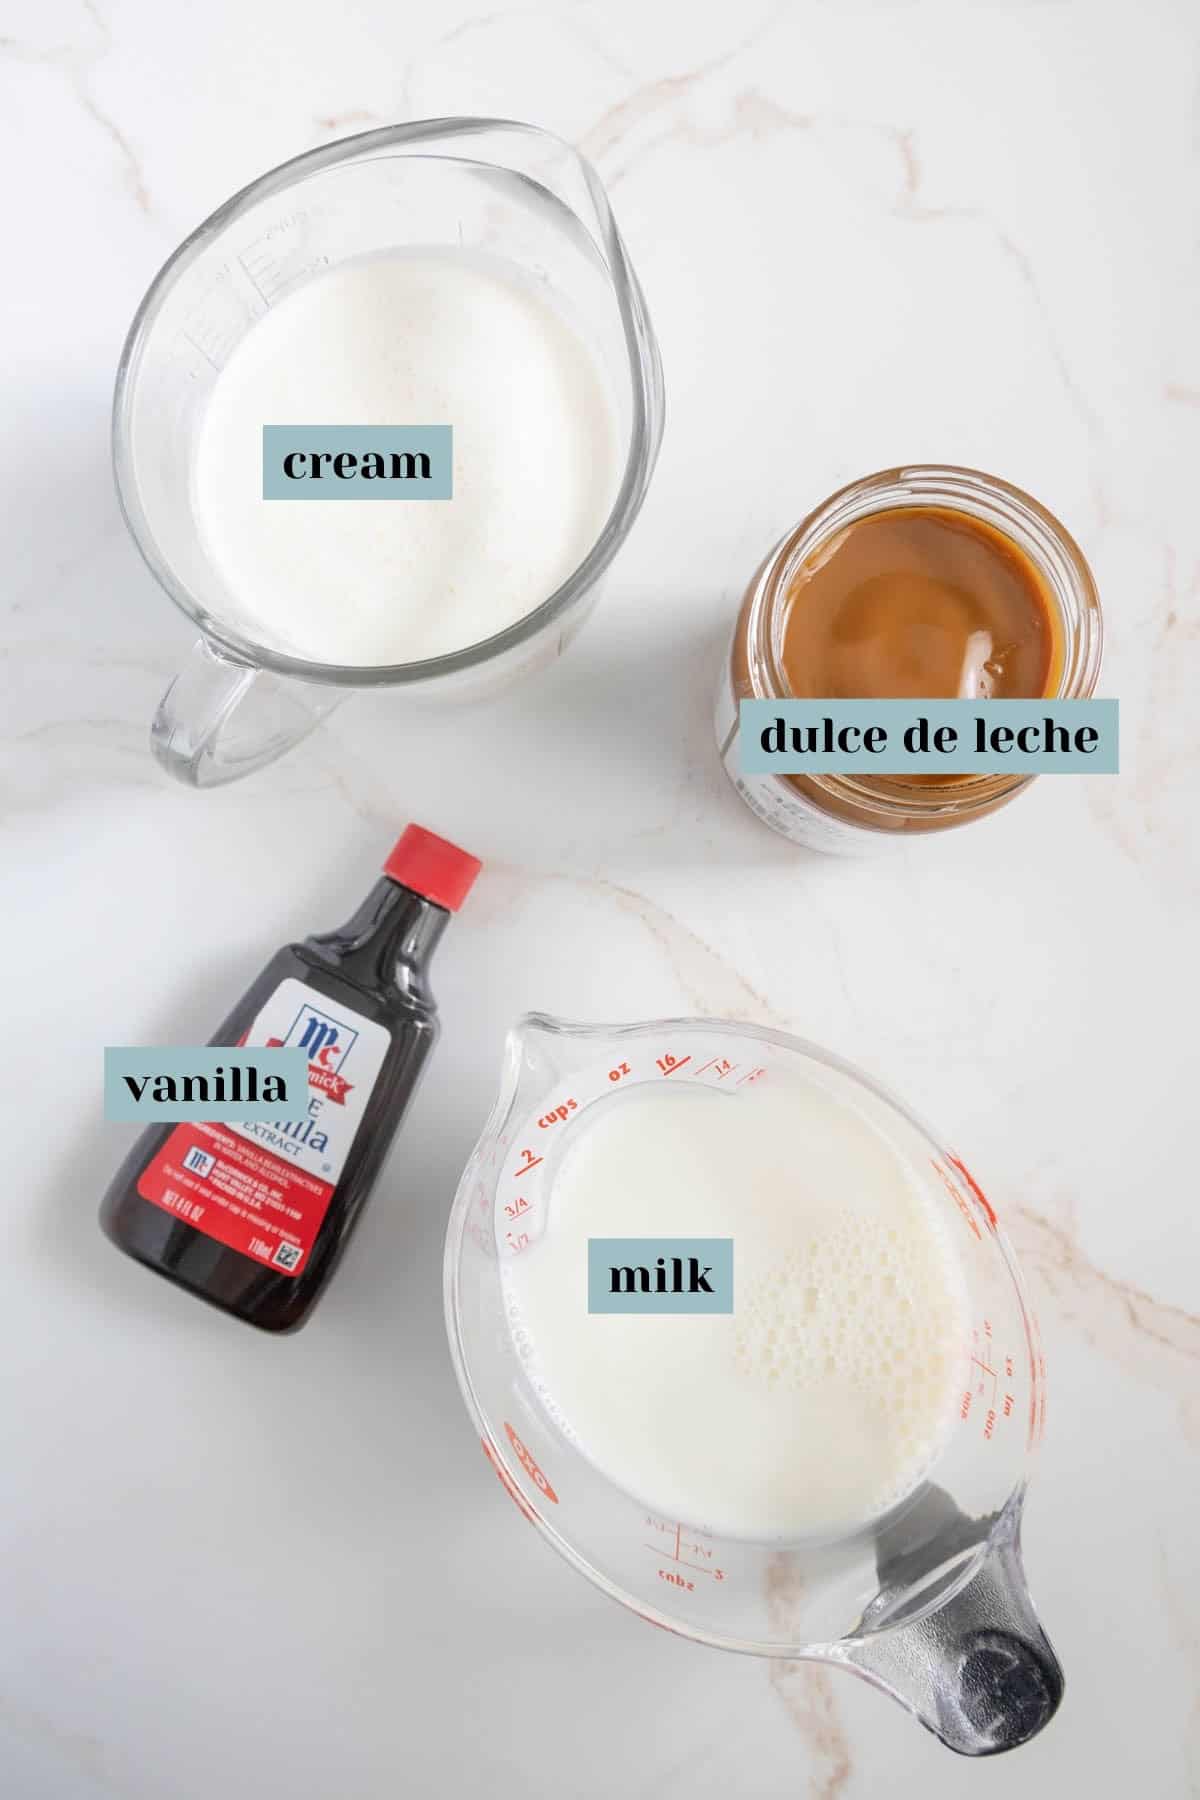 Overhead view of ingredients on a countertop: a jar of dulce de leche, a bottle of vanilla extract, a measuring cup of cream, and a measuring cup of milk.